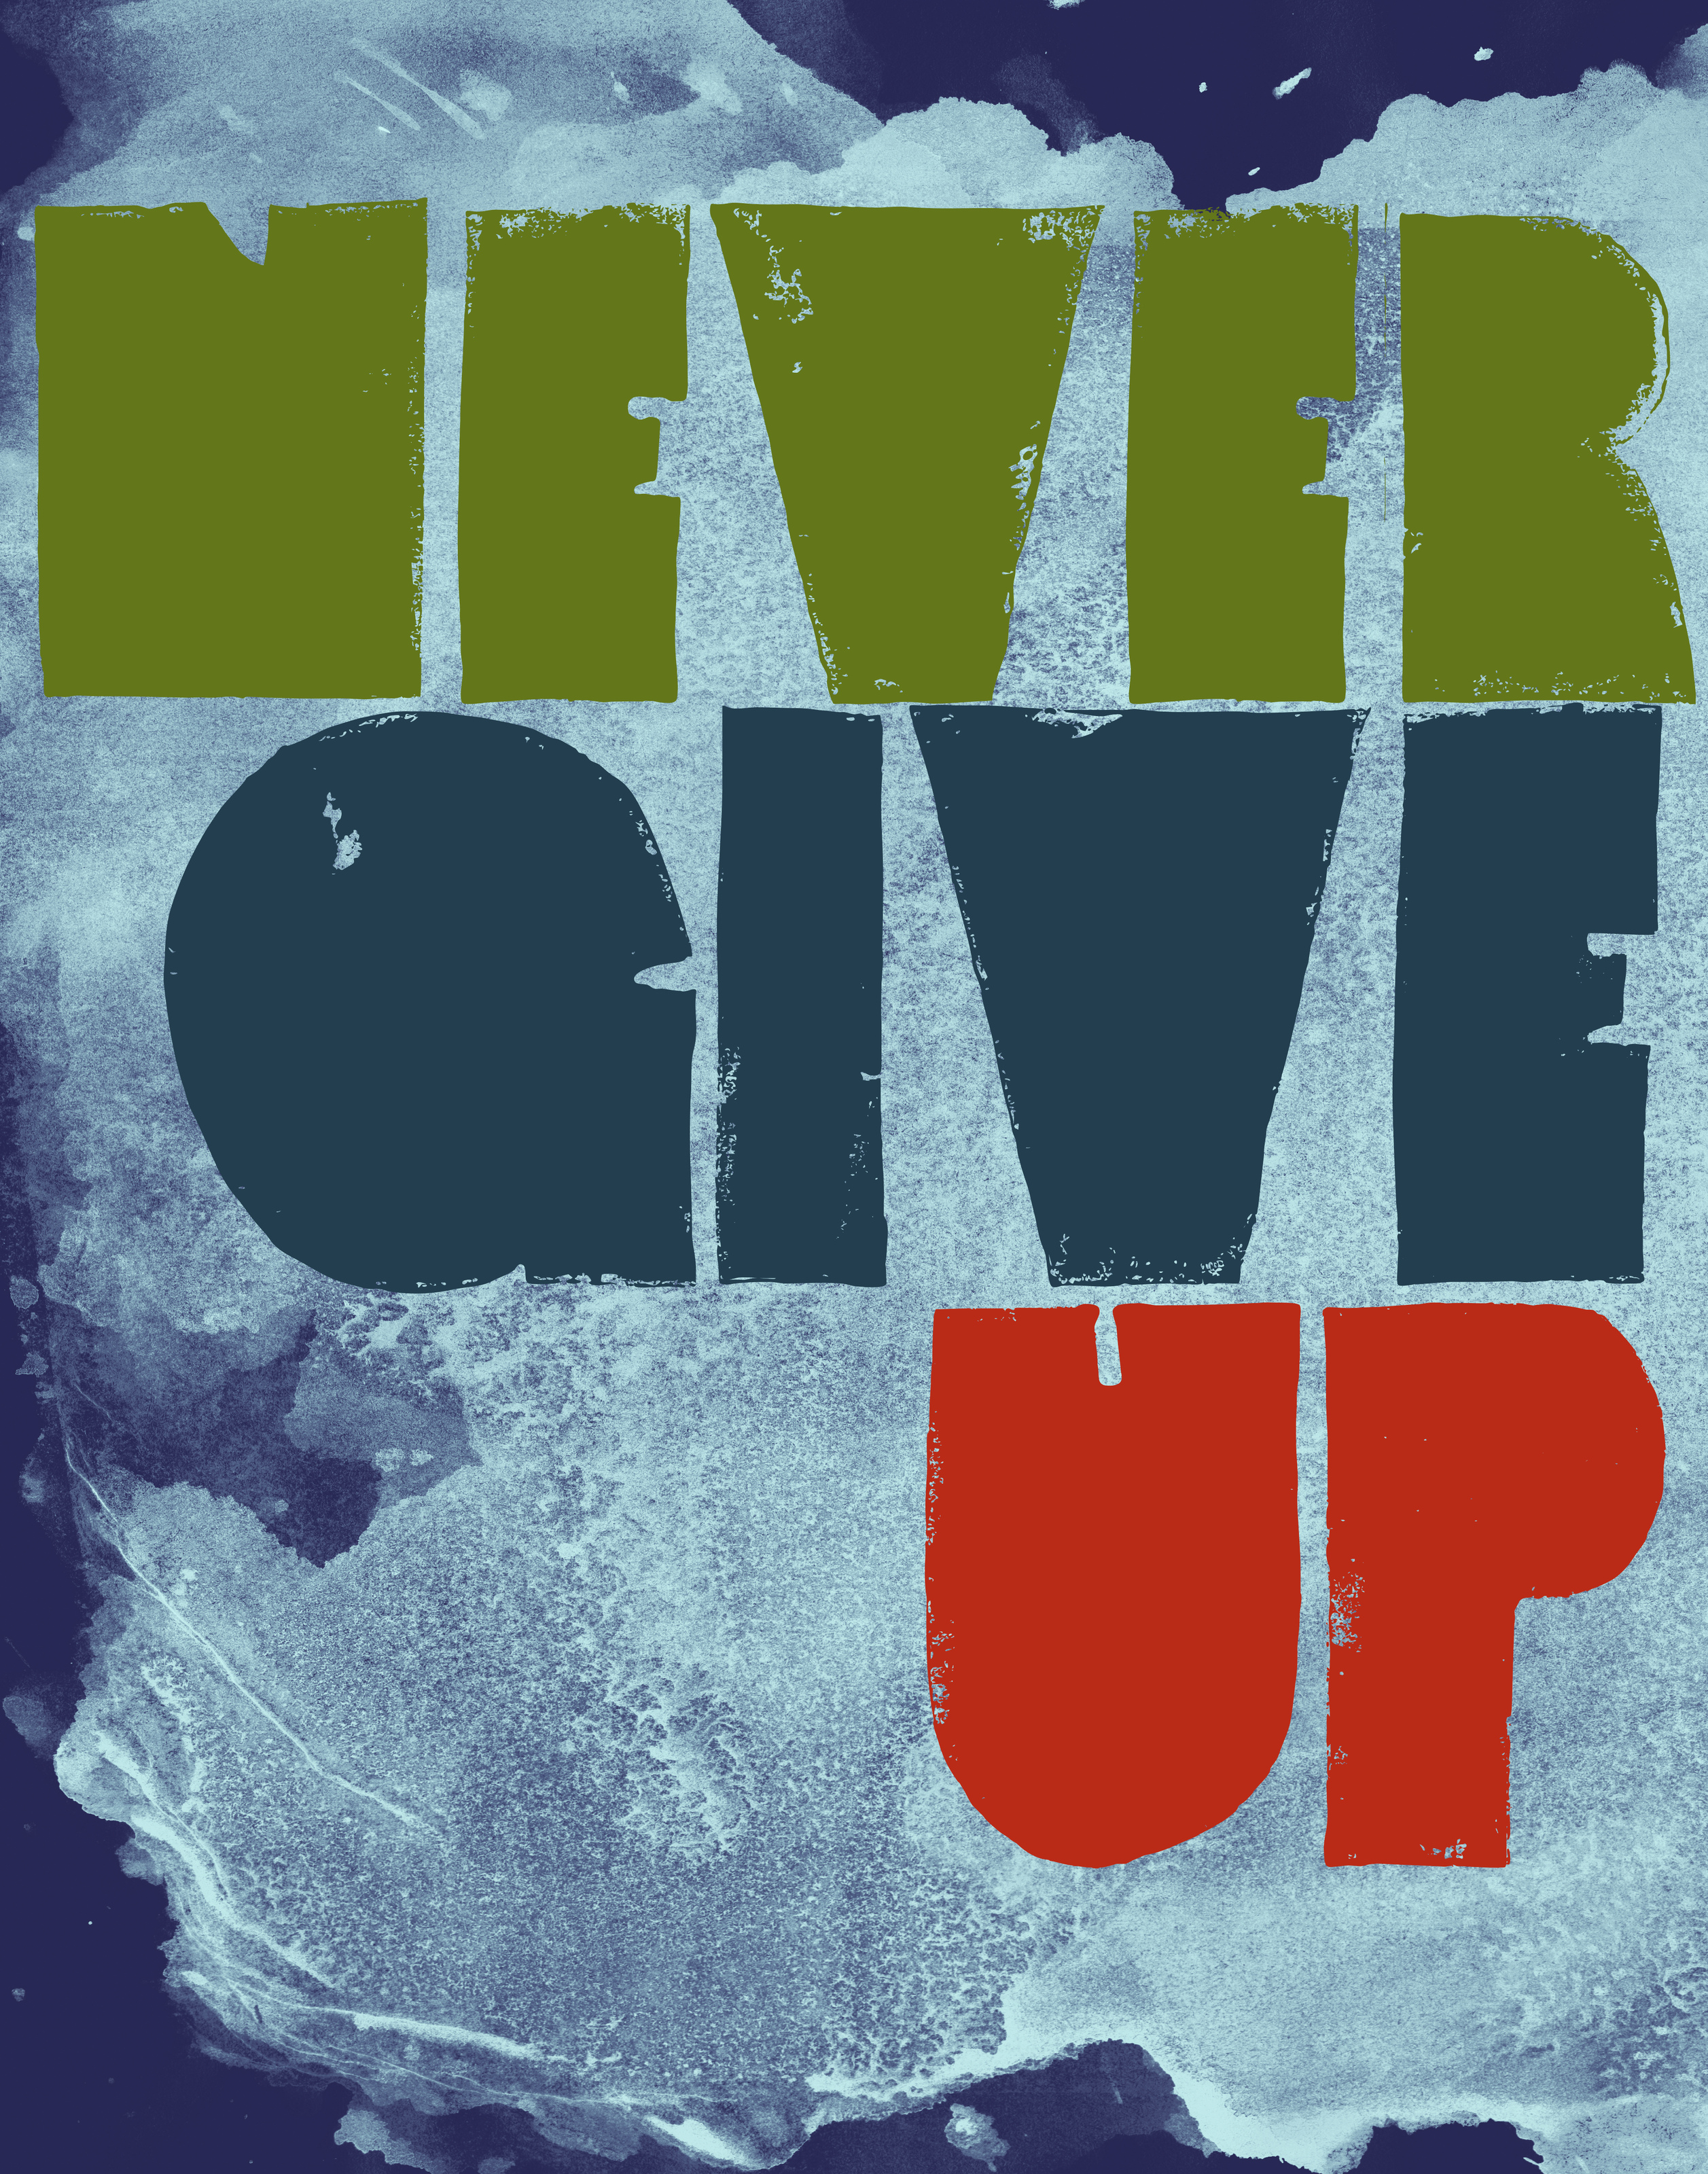 never give up wallpaper hd